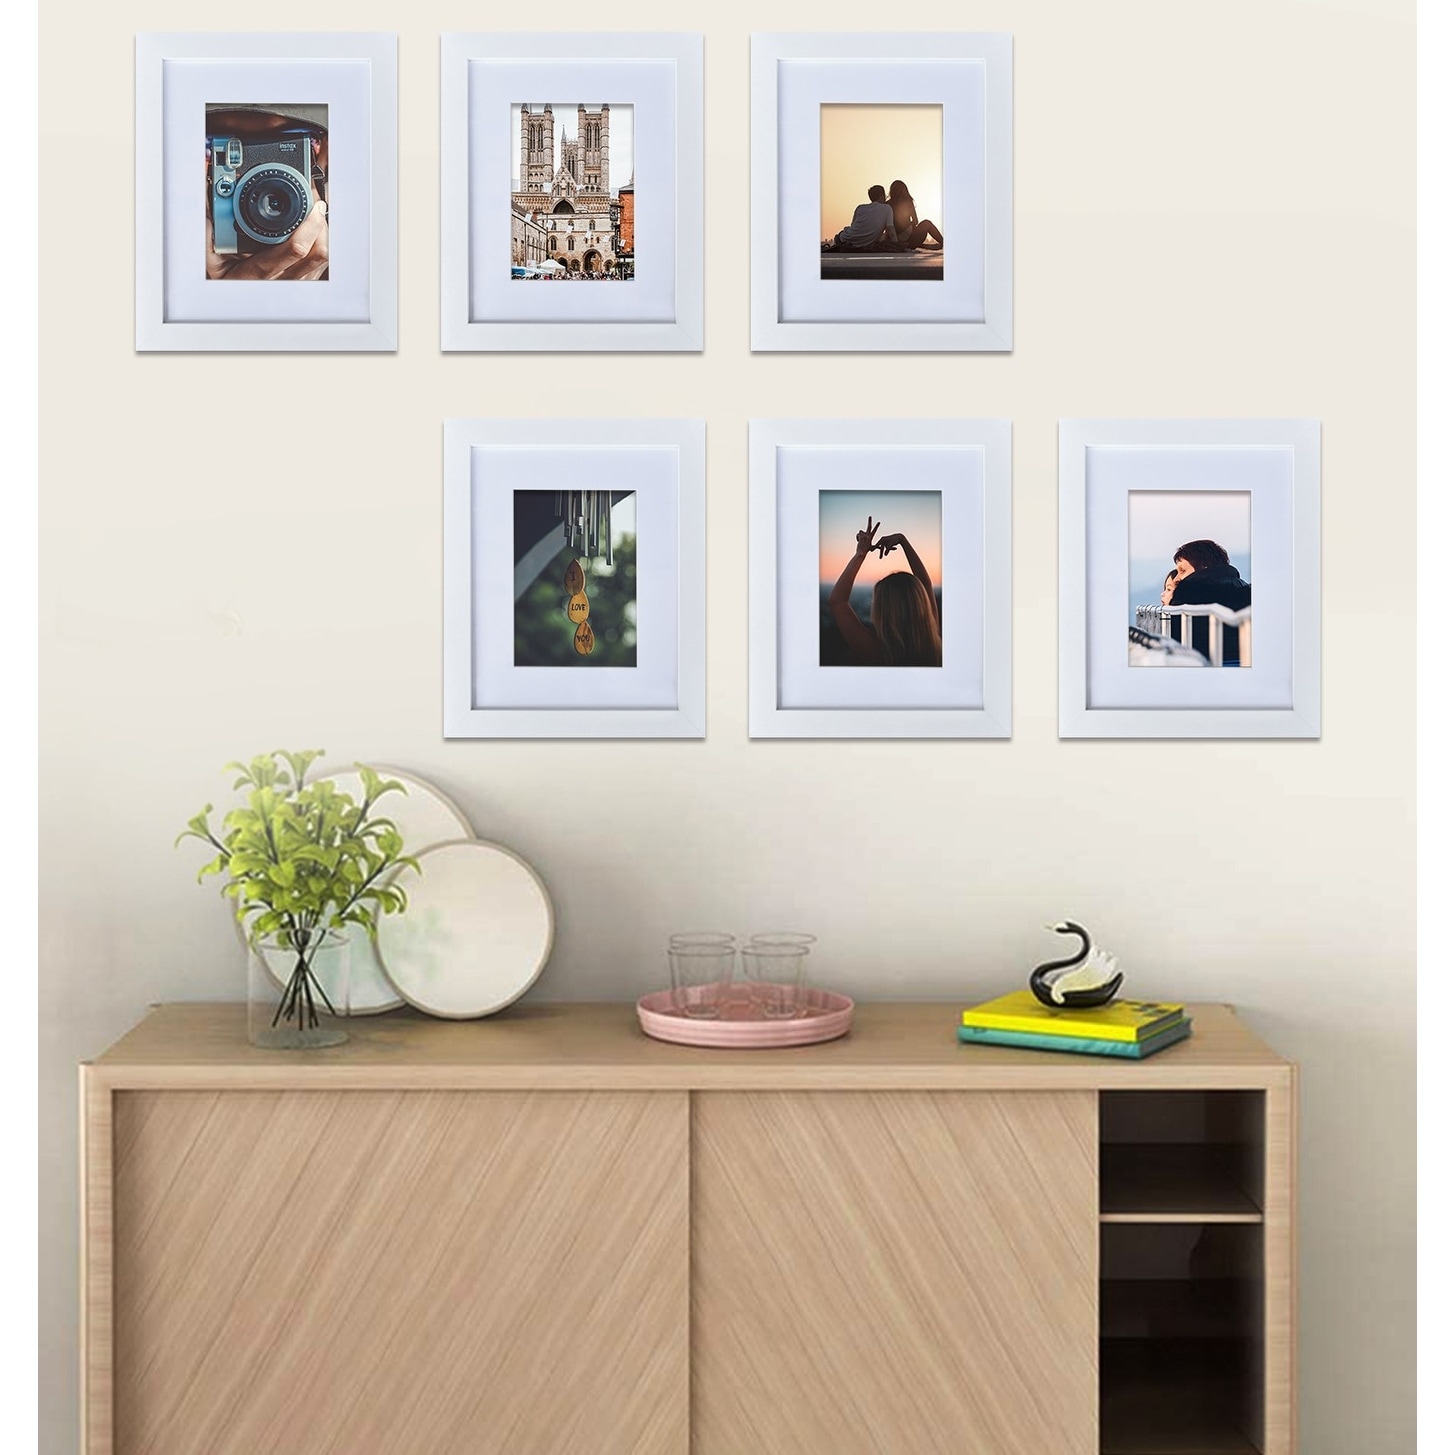 11x14 Inch Wood Picture Frame - Set of 4 (Set of 4)